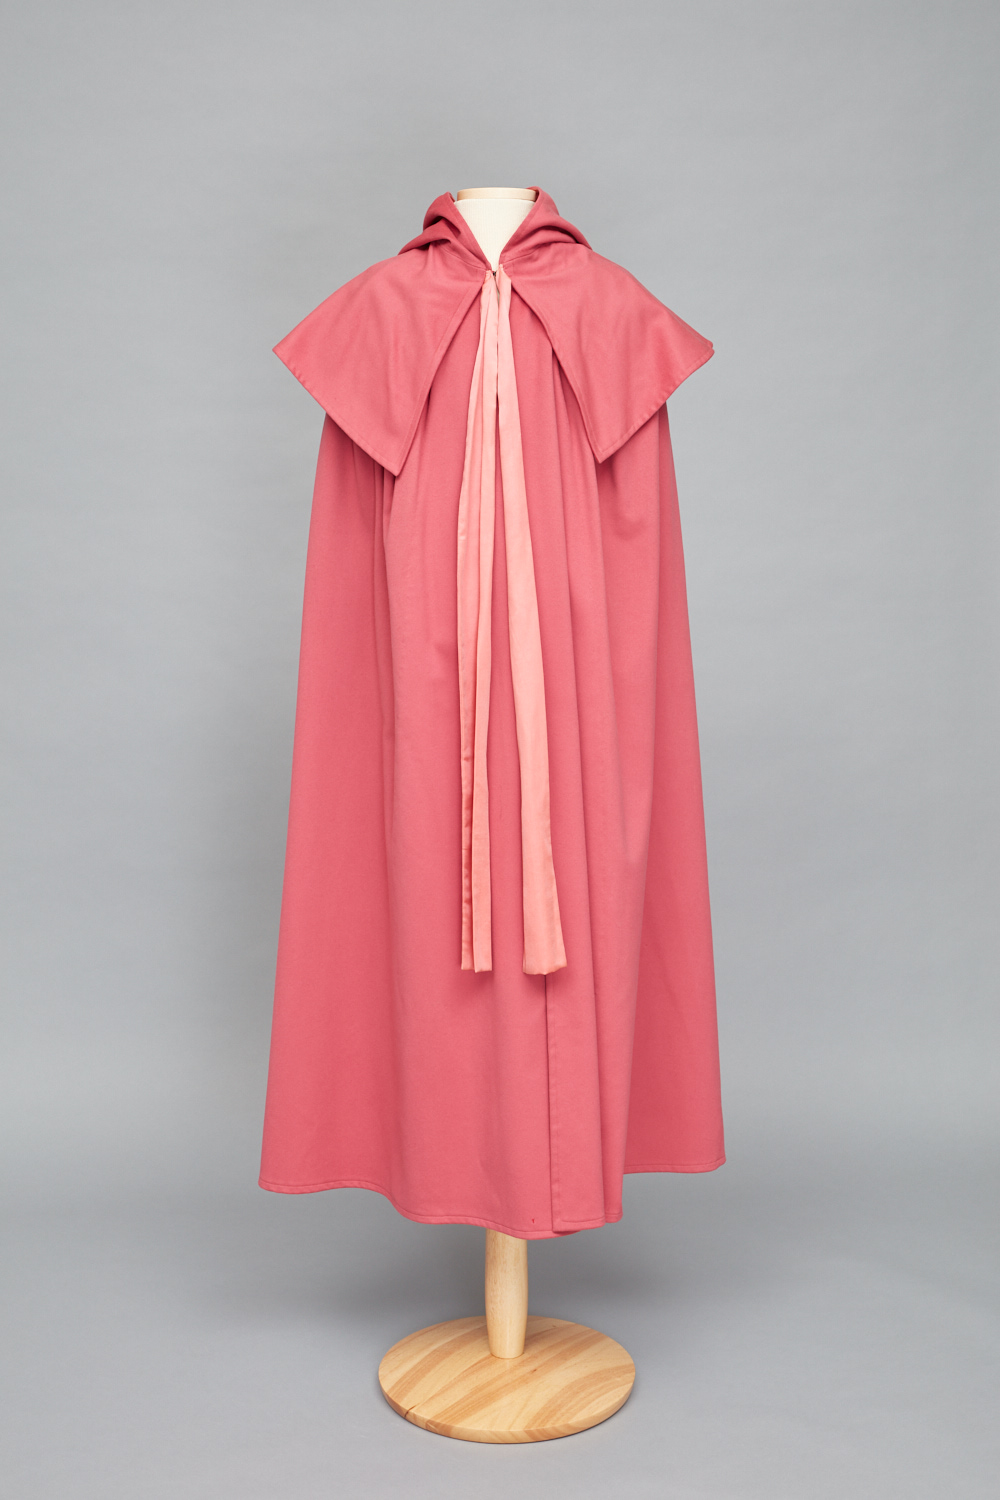 A pink cape on a mannequin.